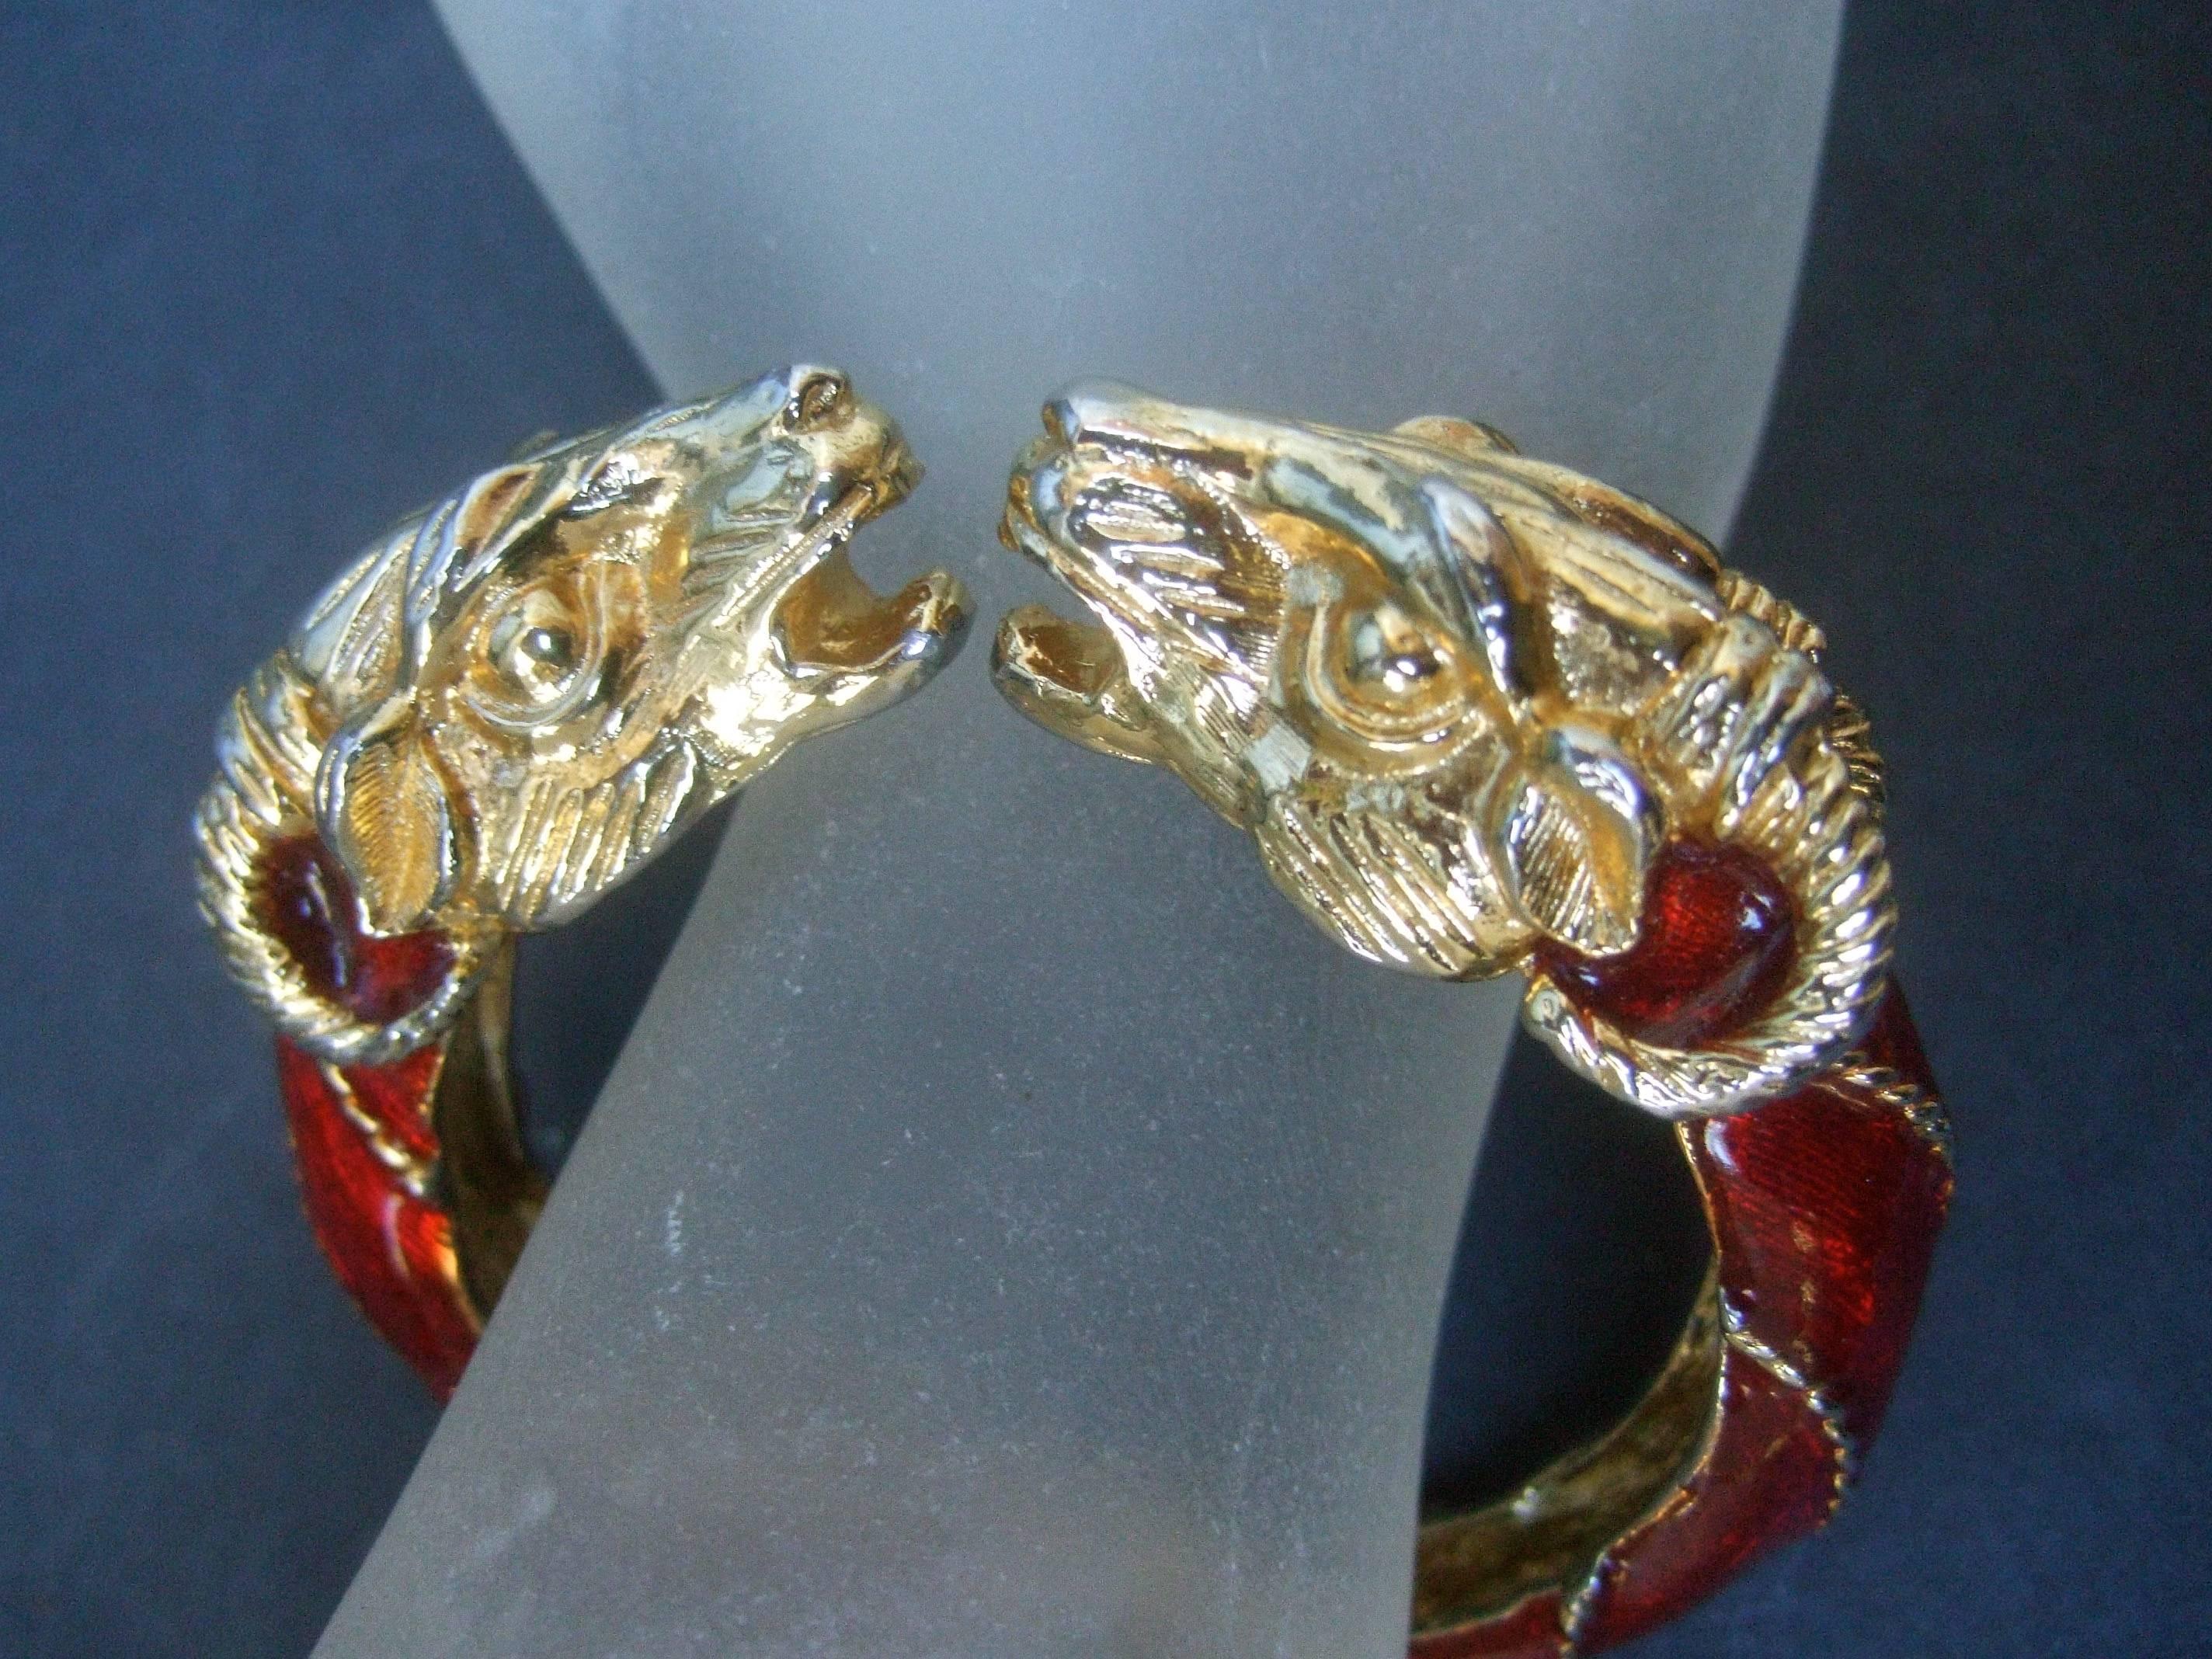 Gilt metal crimson enamel rams head bracelet by Donald Stannard 
The unique coiled hinged bracelet is designed with a pair
of stylized gilt metal rams heads

The sides of the bracelet are sheathed in red enamel lacquer 
juxtaposed with striated